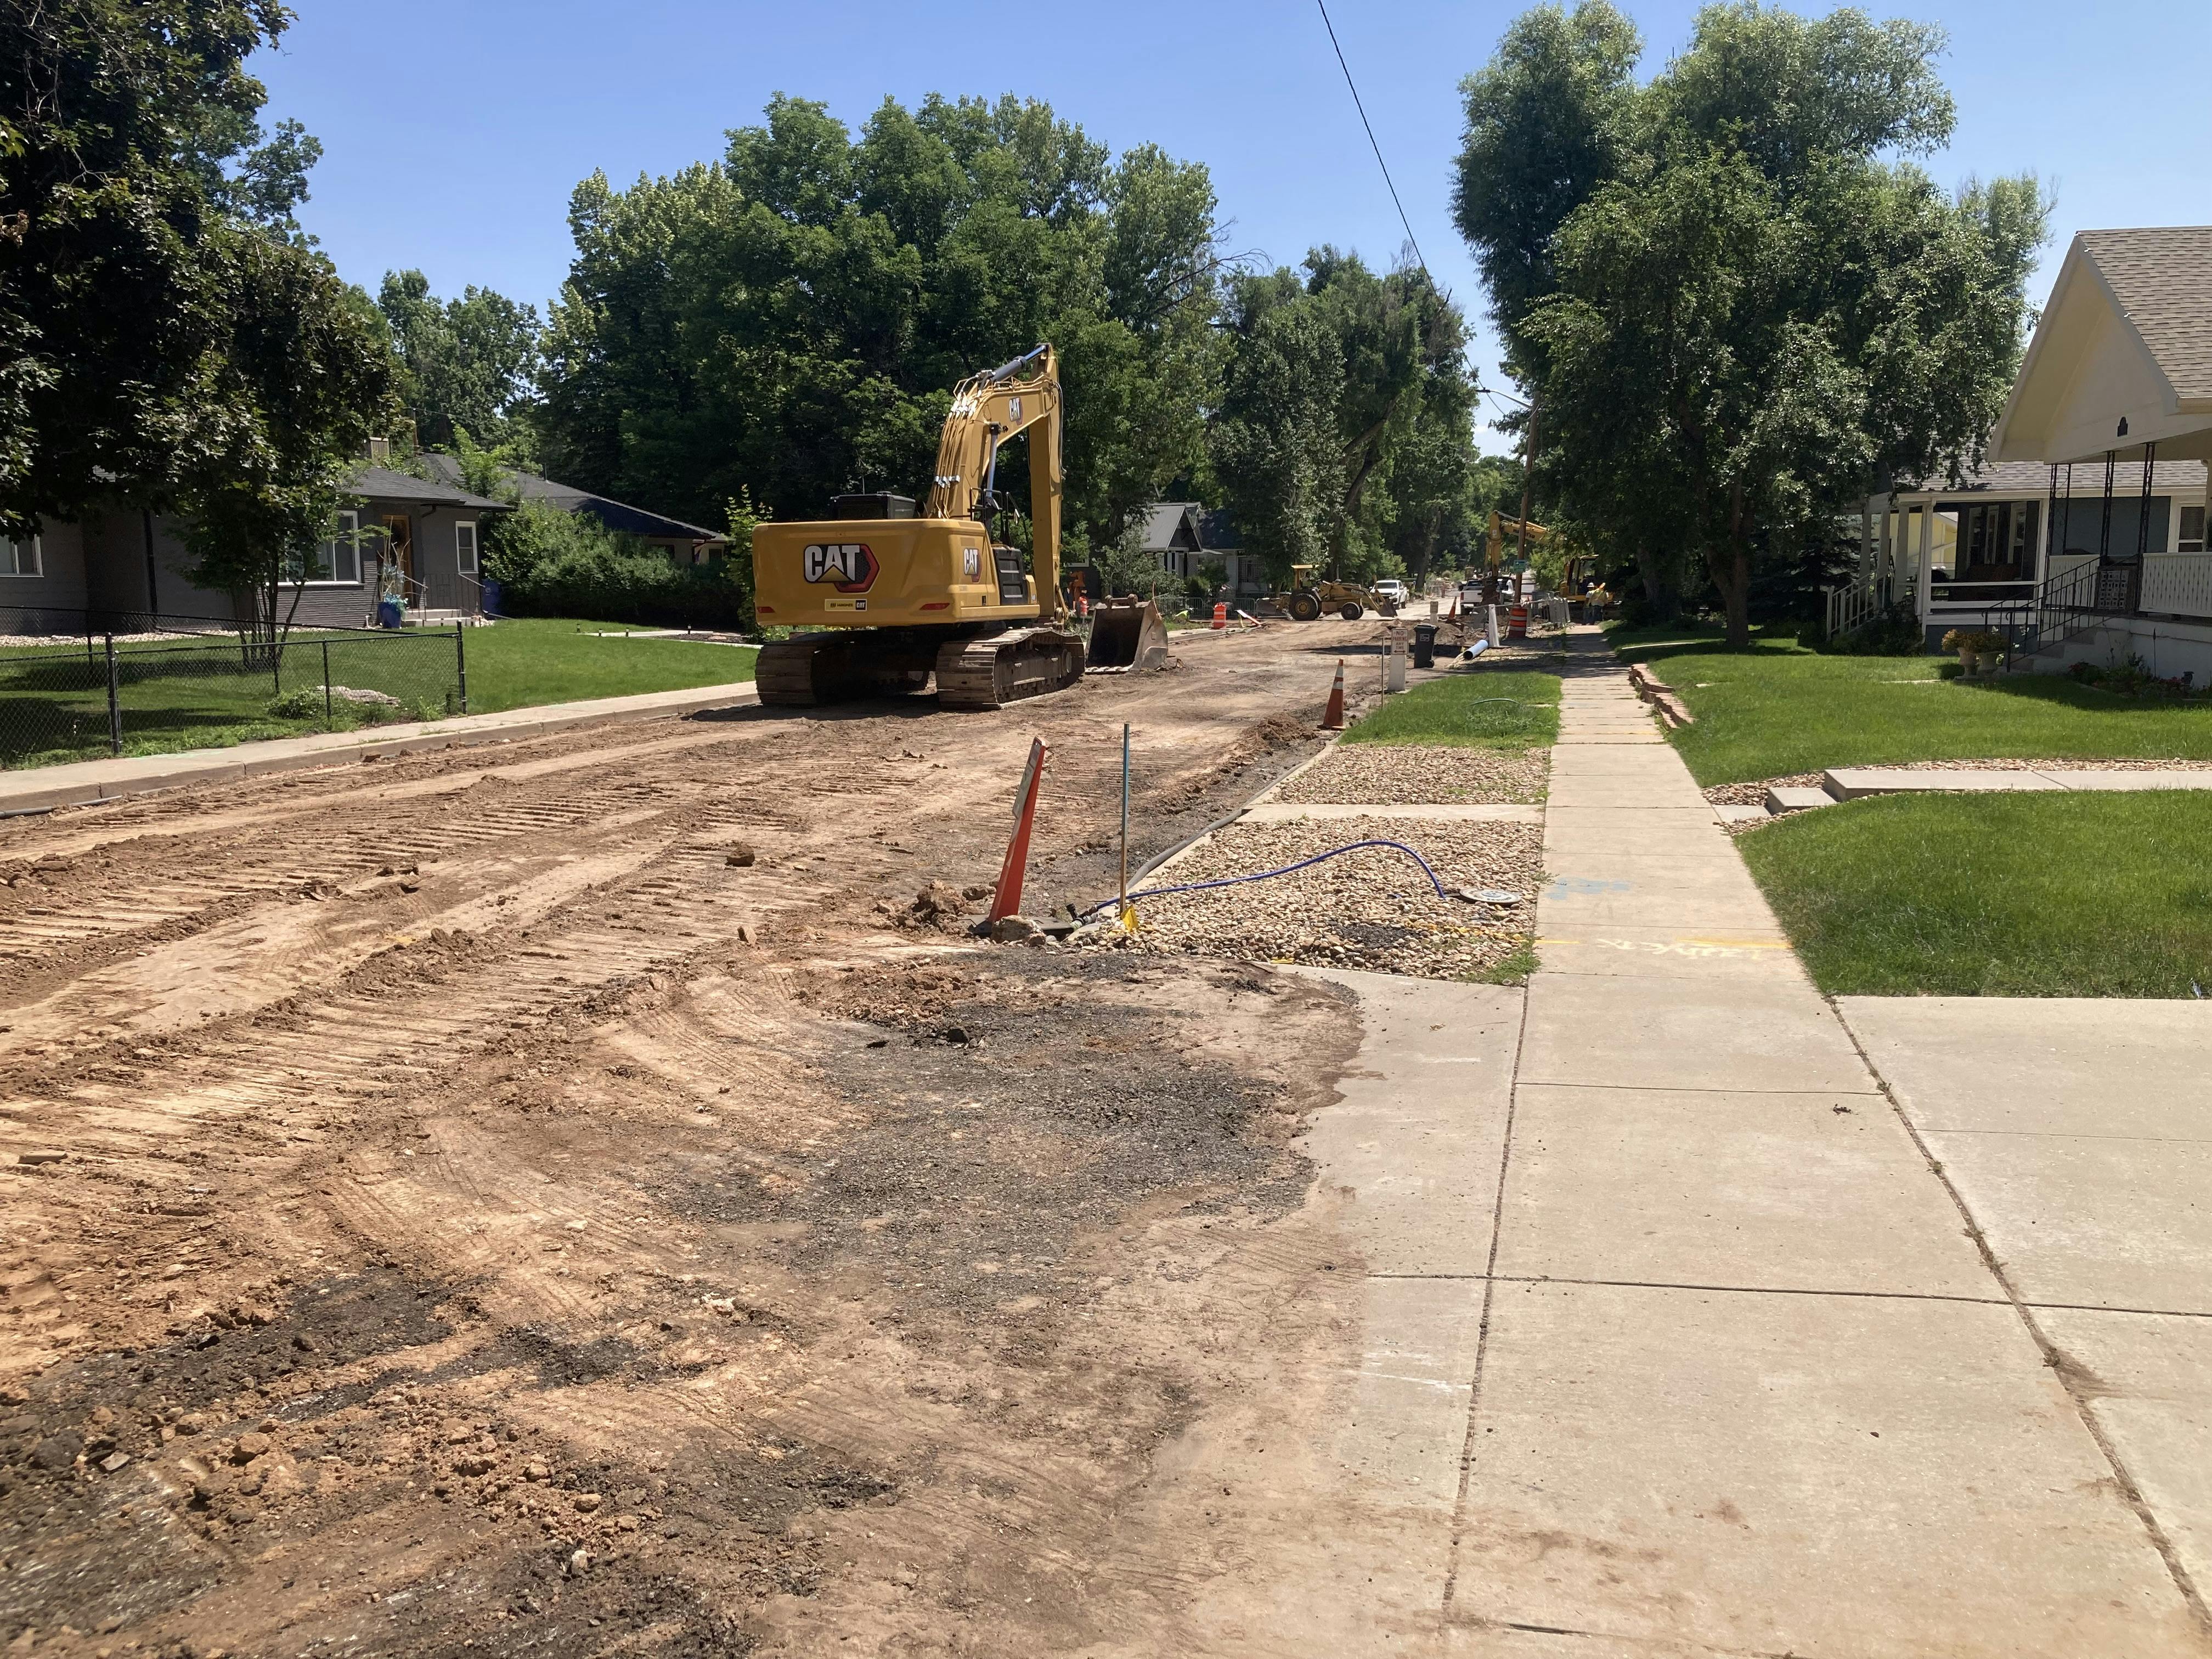 Road construction activities at W. 4th Street, looking east towards N. Colorado Avenue.